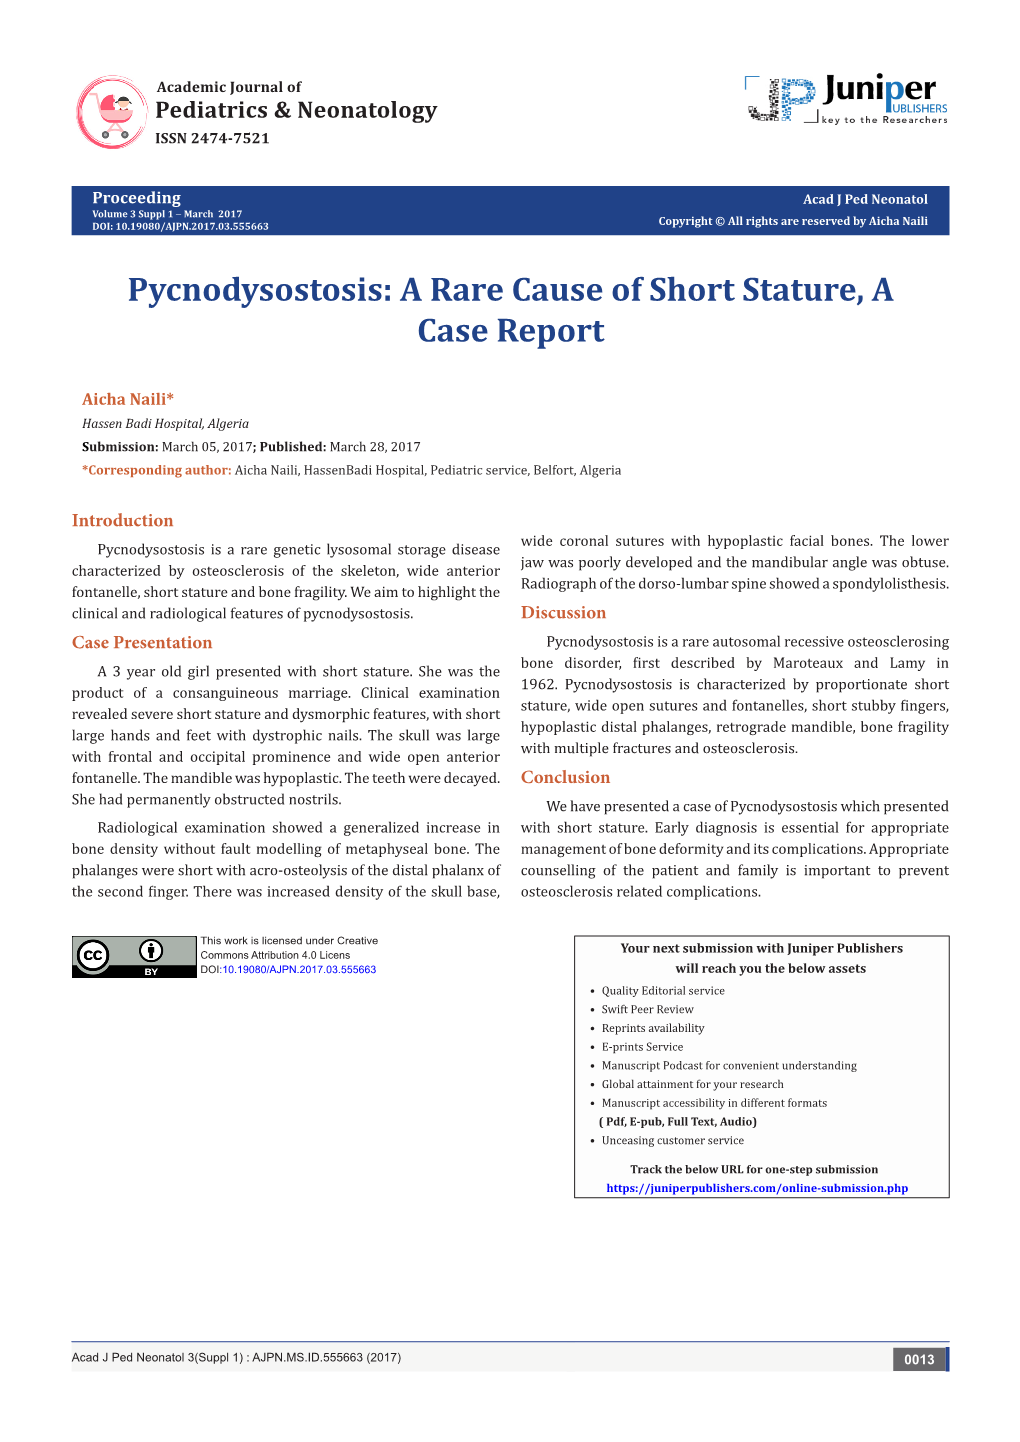 Pycnodysostosis: a Rare Cause of Short Stature, a Case Report